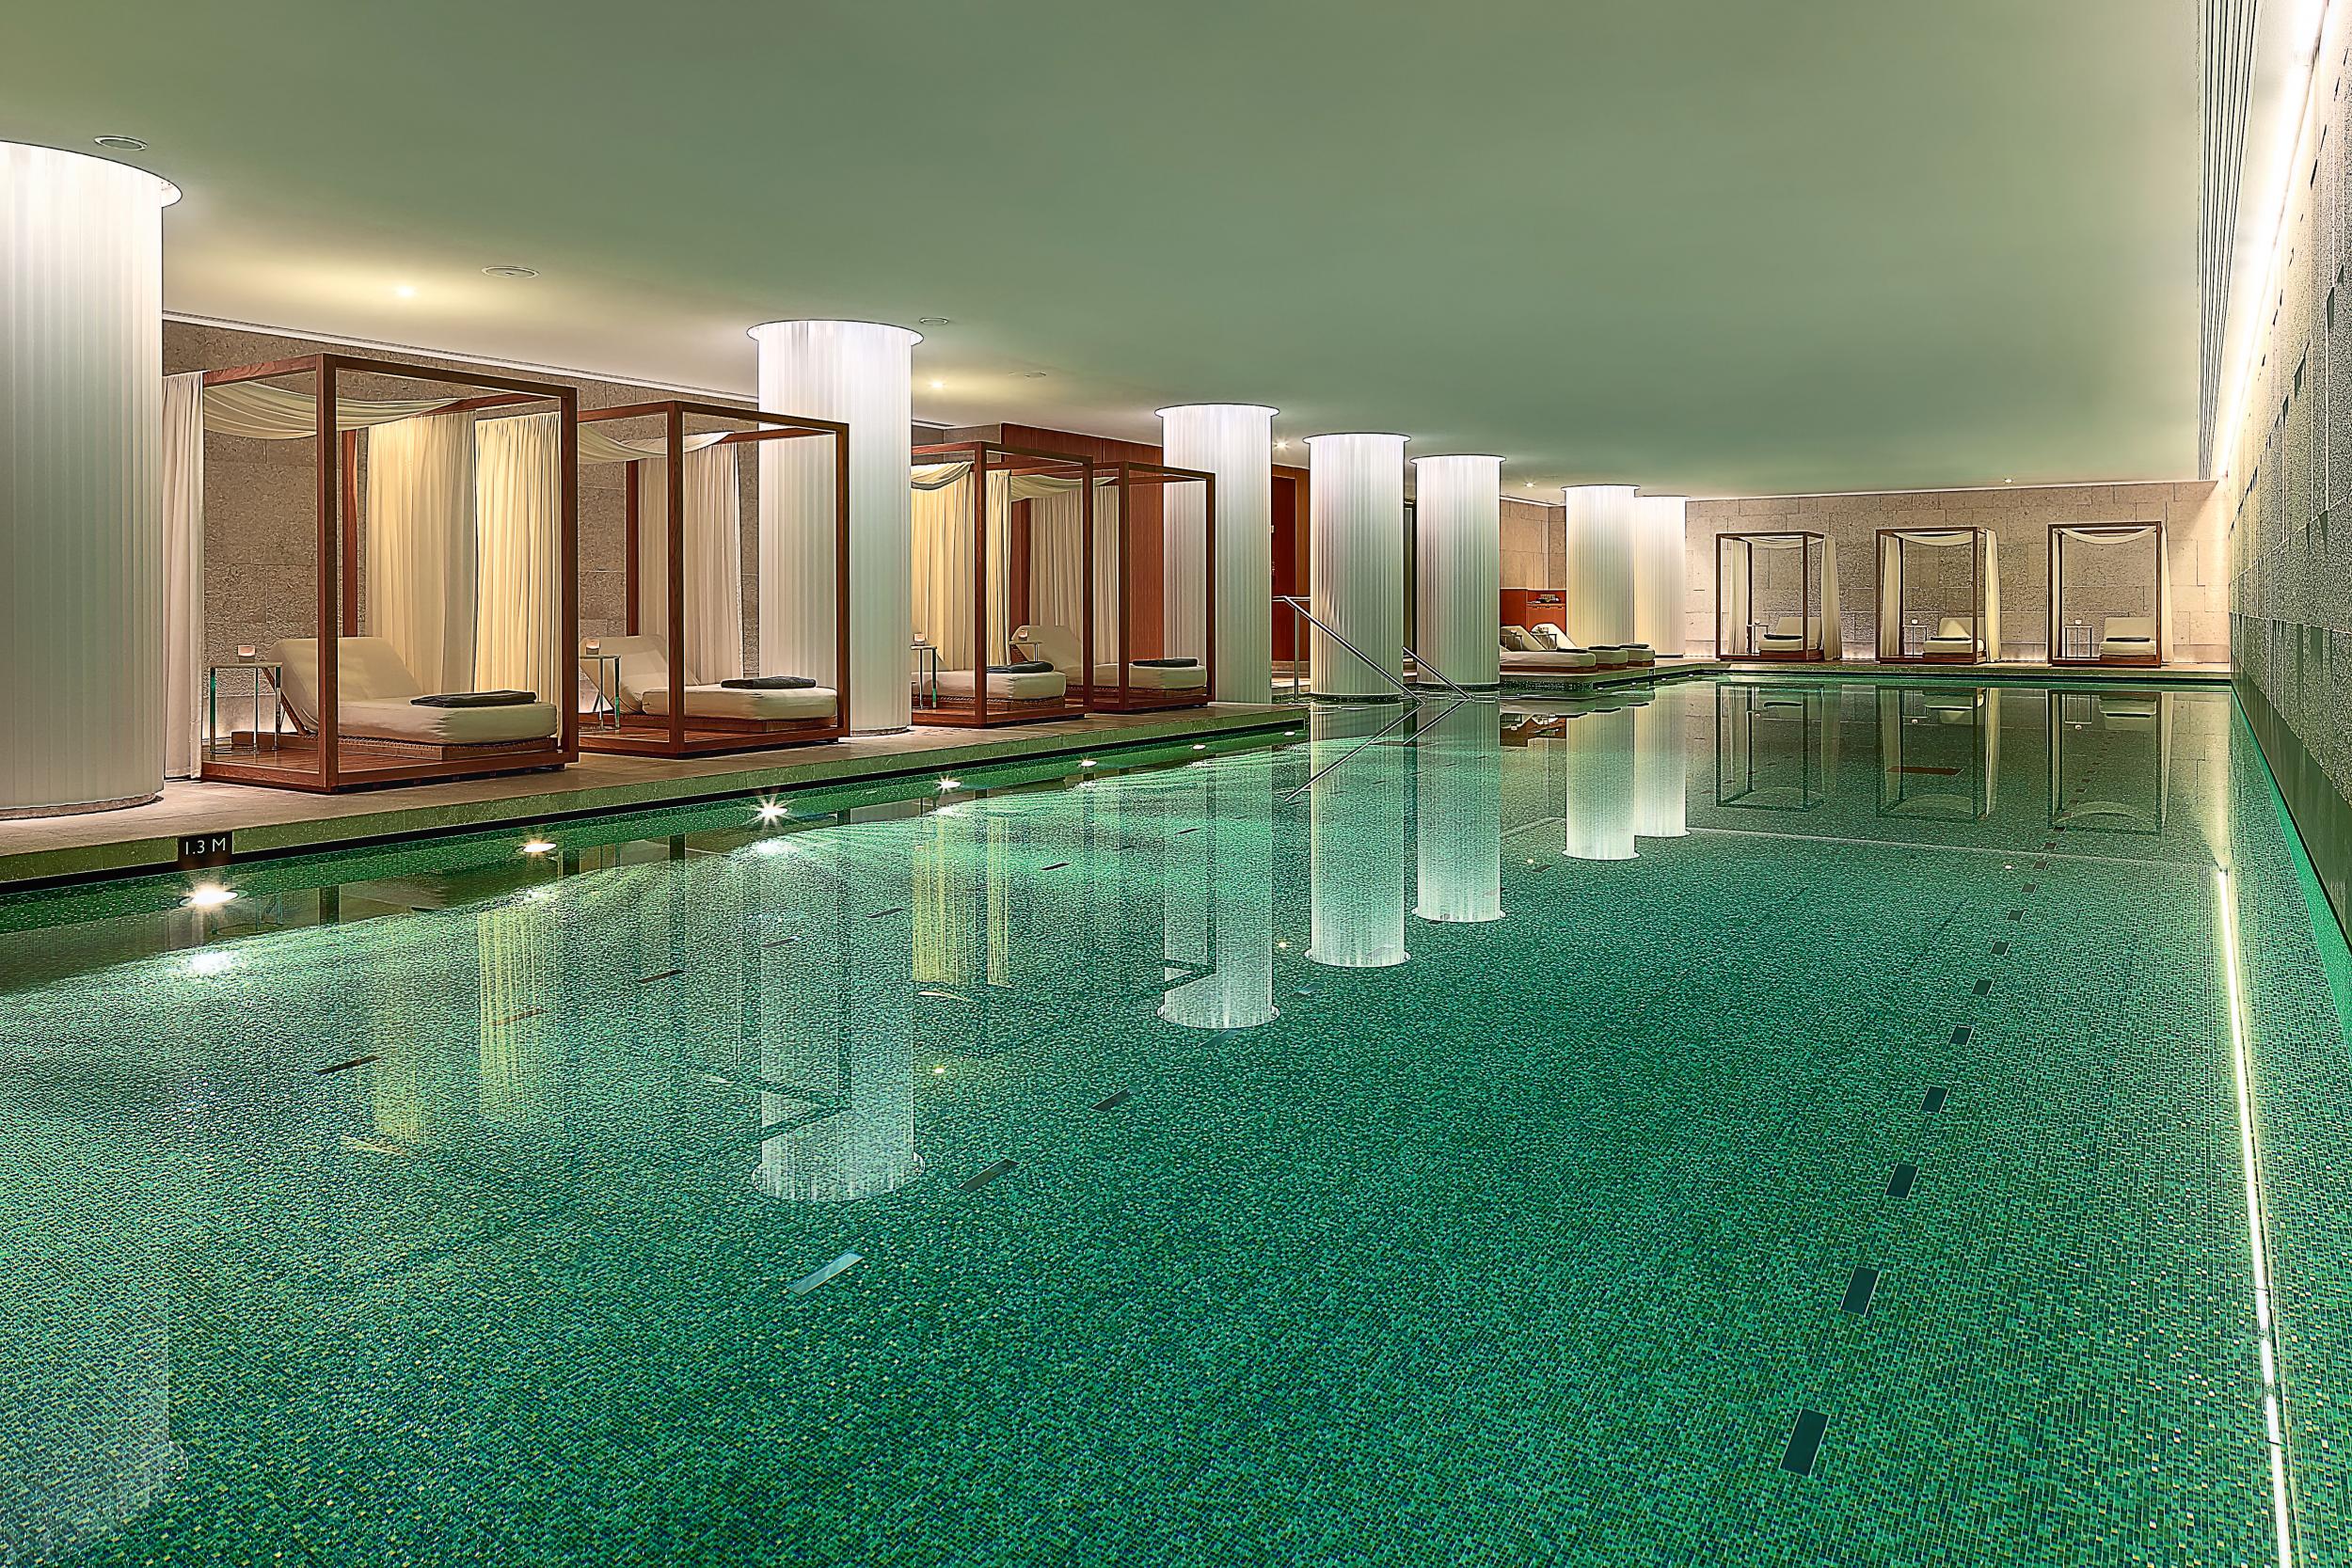 London's largest spa pool can be found at Bvlgari Hotel